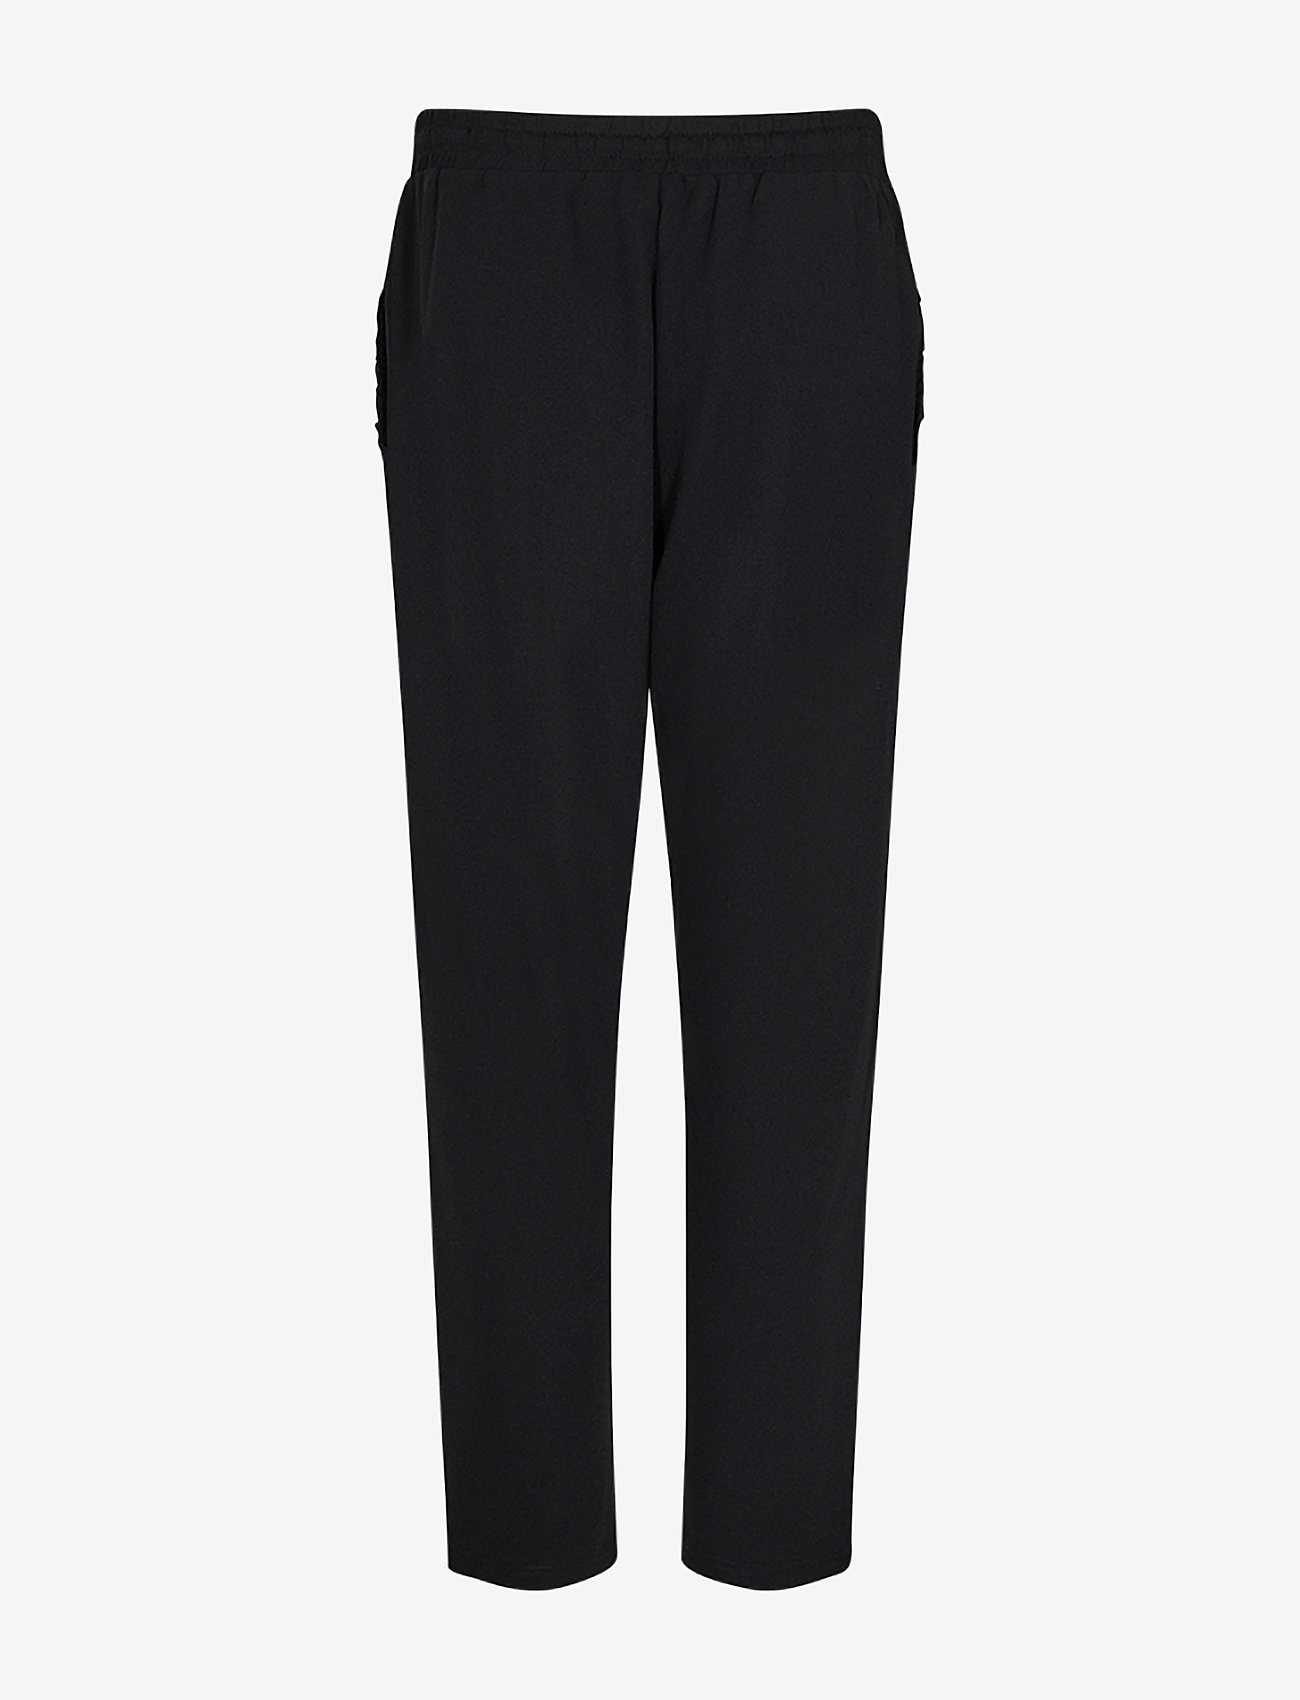 Soyaconcept - SC-SIHAM - casual trousers - black - 1